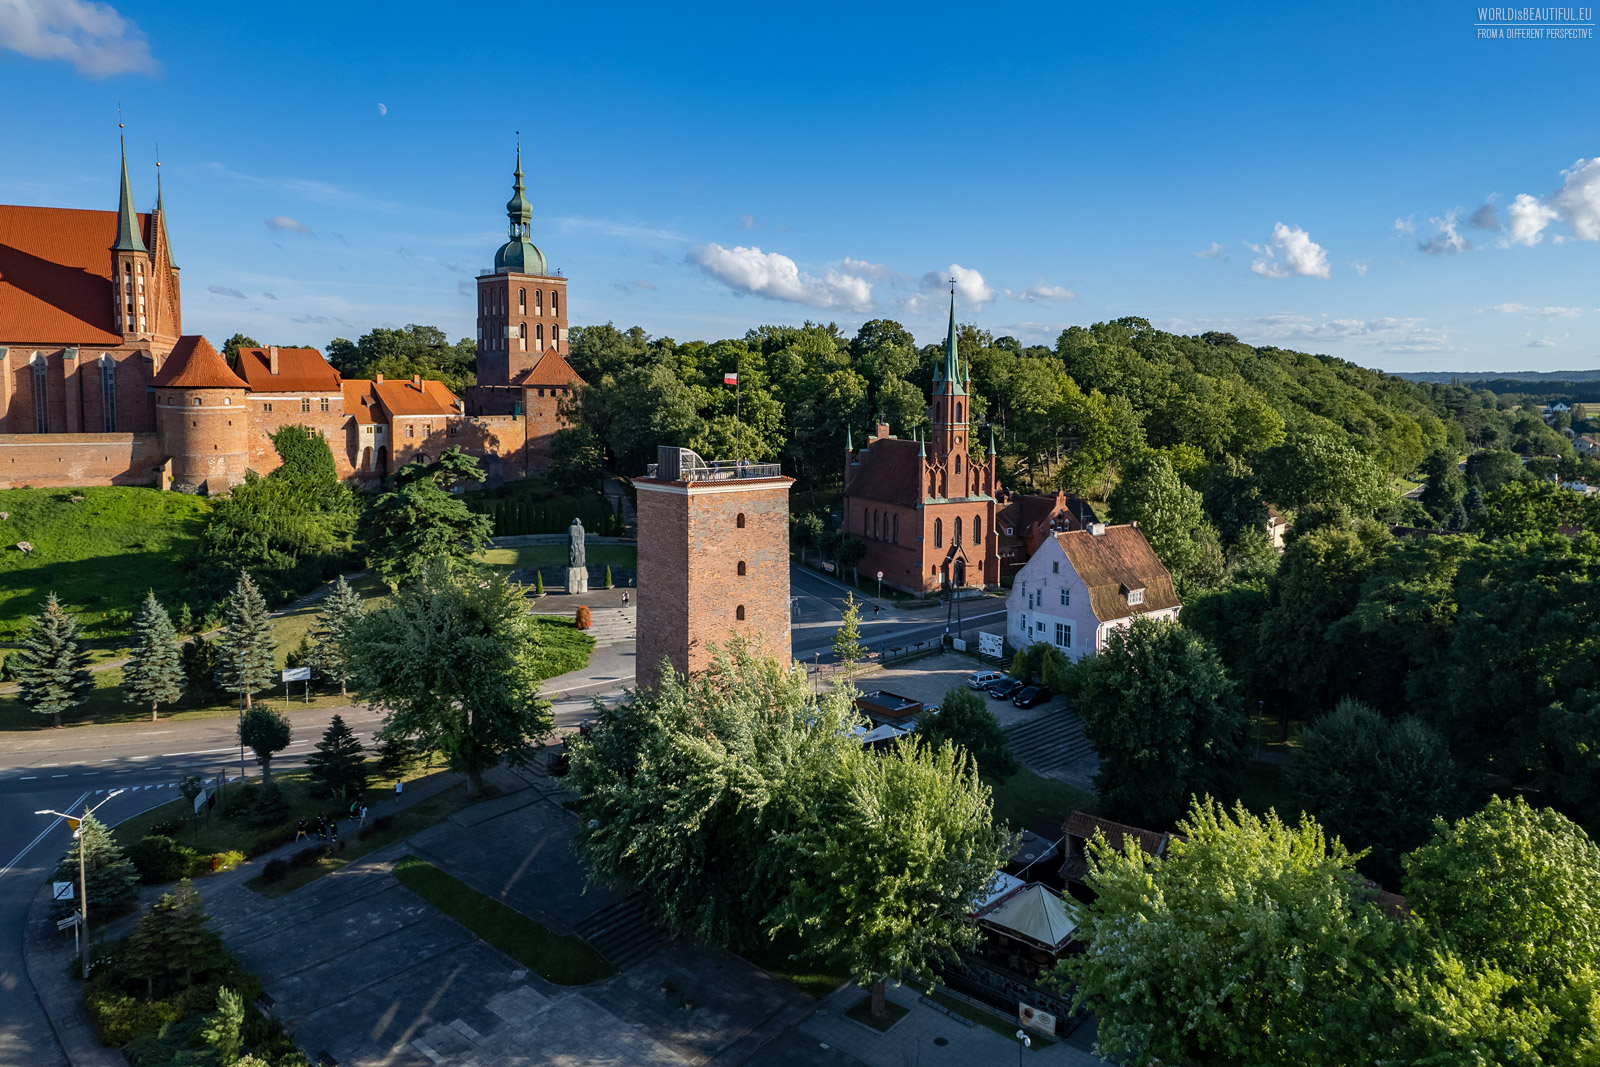 Water tower in Frombork